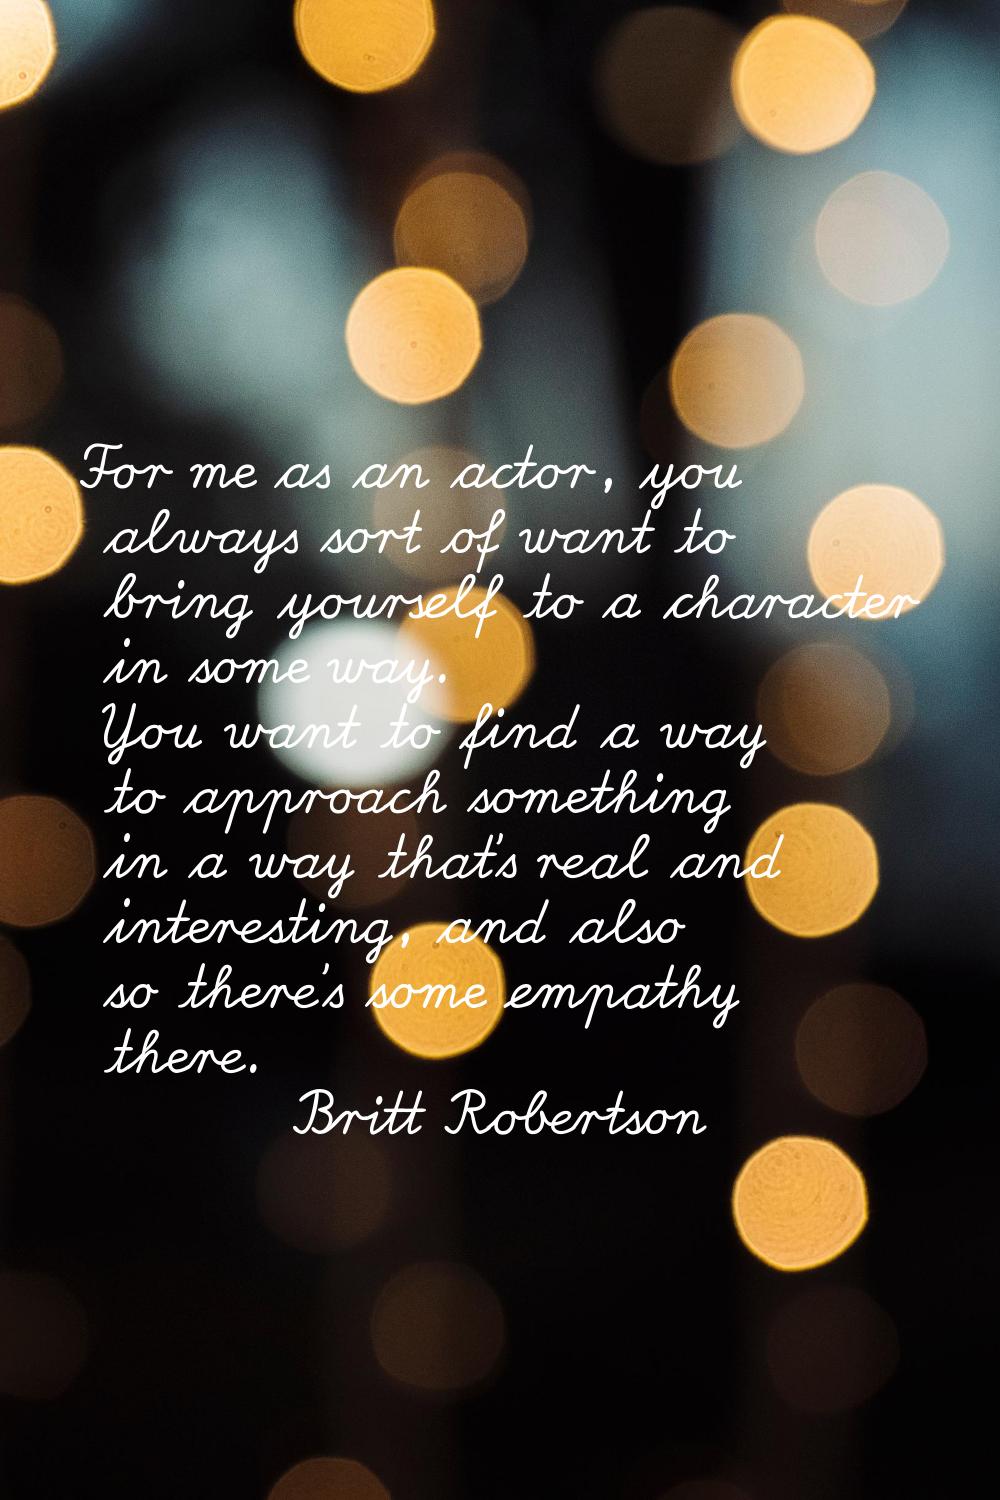 For me as an actor, you always sort of want to bring yourself to a character in some way. You want 